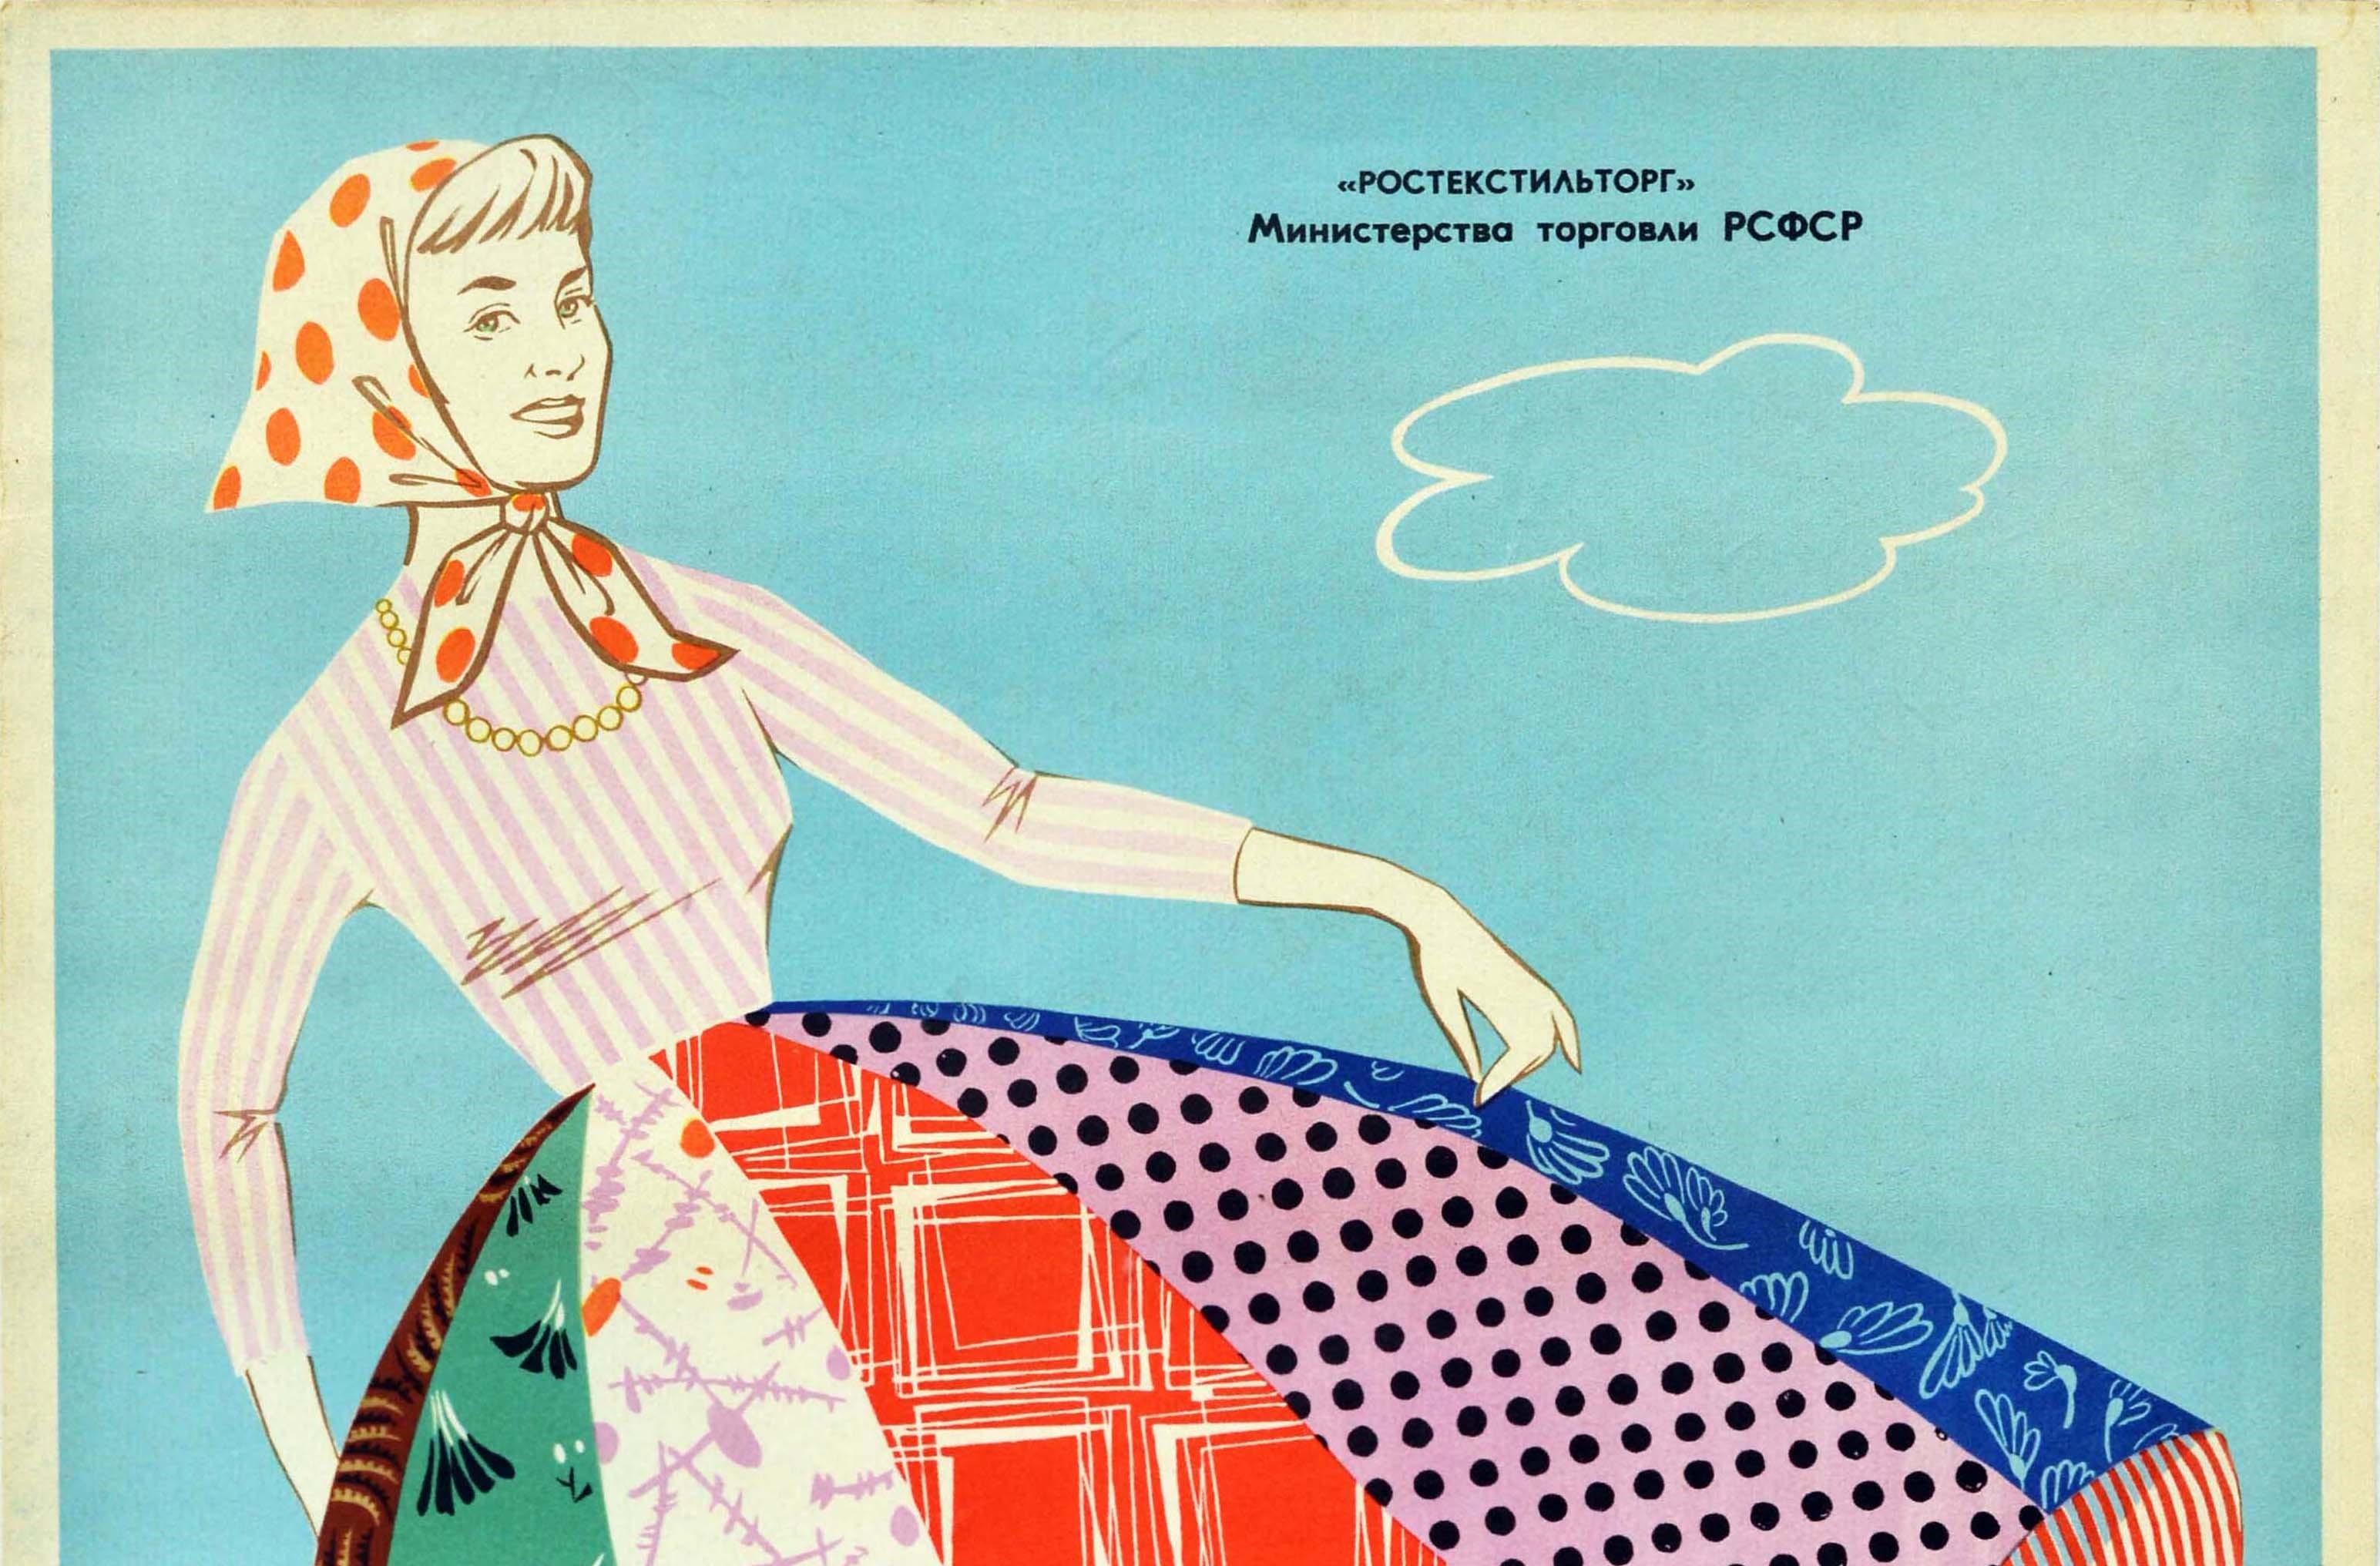 Original vintage advertising poster issued by the Ministry of Trade of the RSFSR Russian Soviet Federative Socialist Republic. The design features a smiling young lady wearing a white and pink striped shirt and a colourful skirt in different